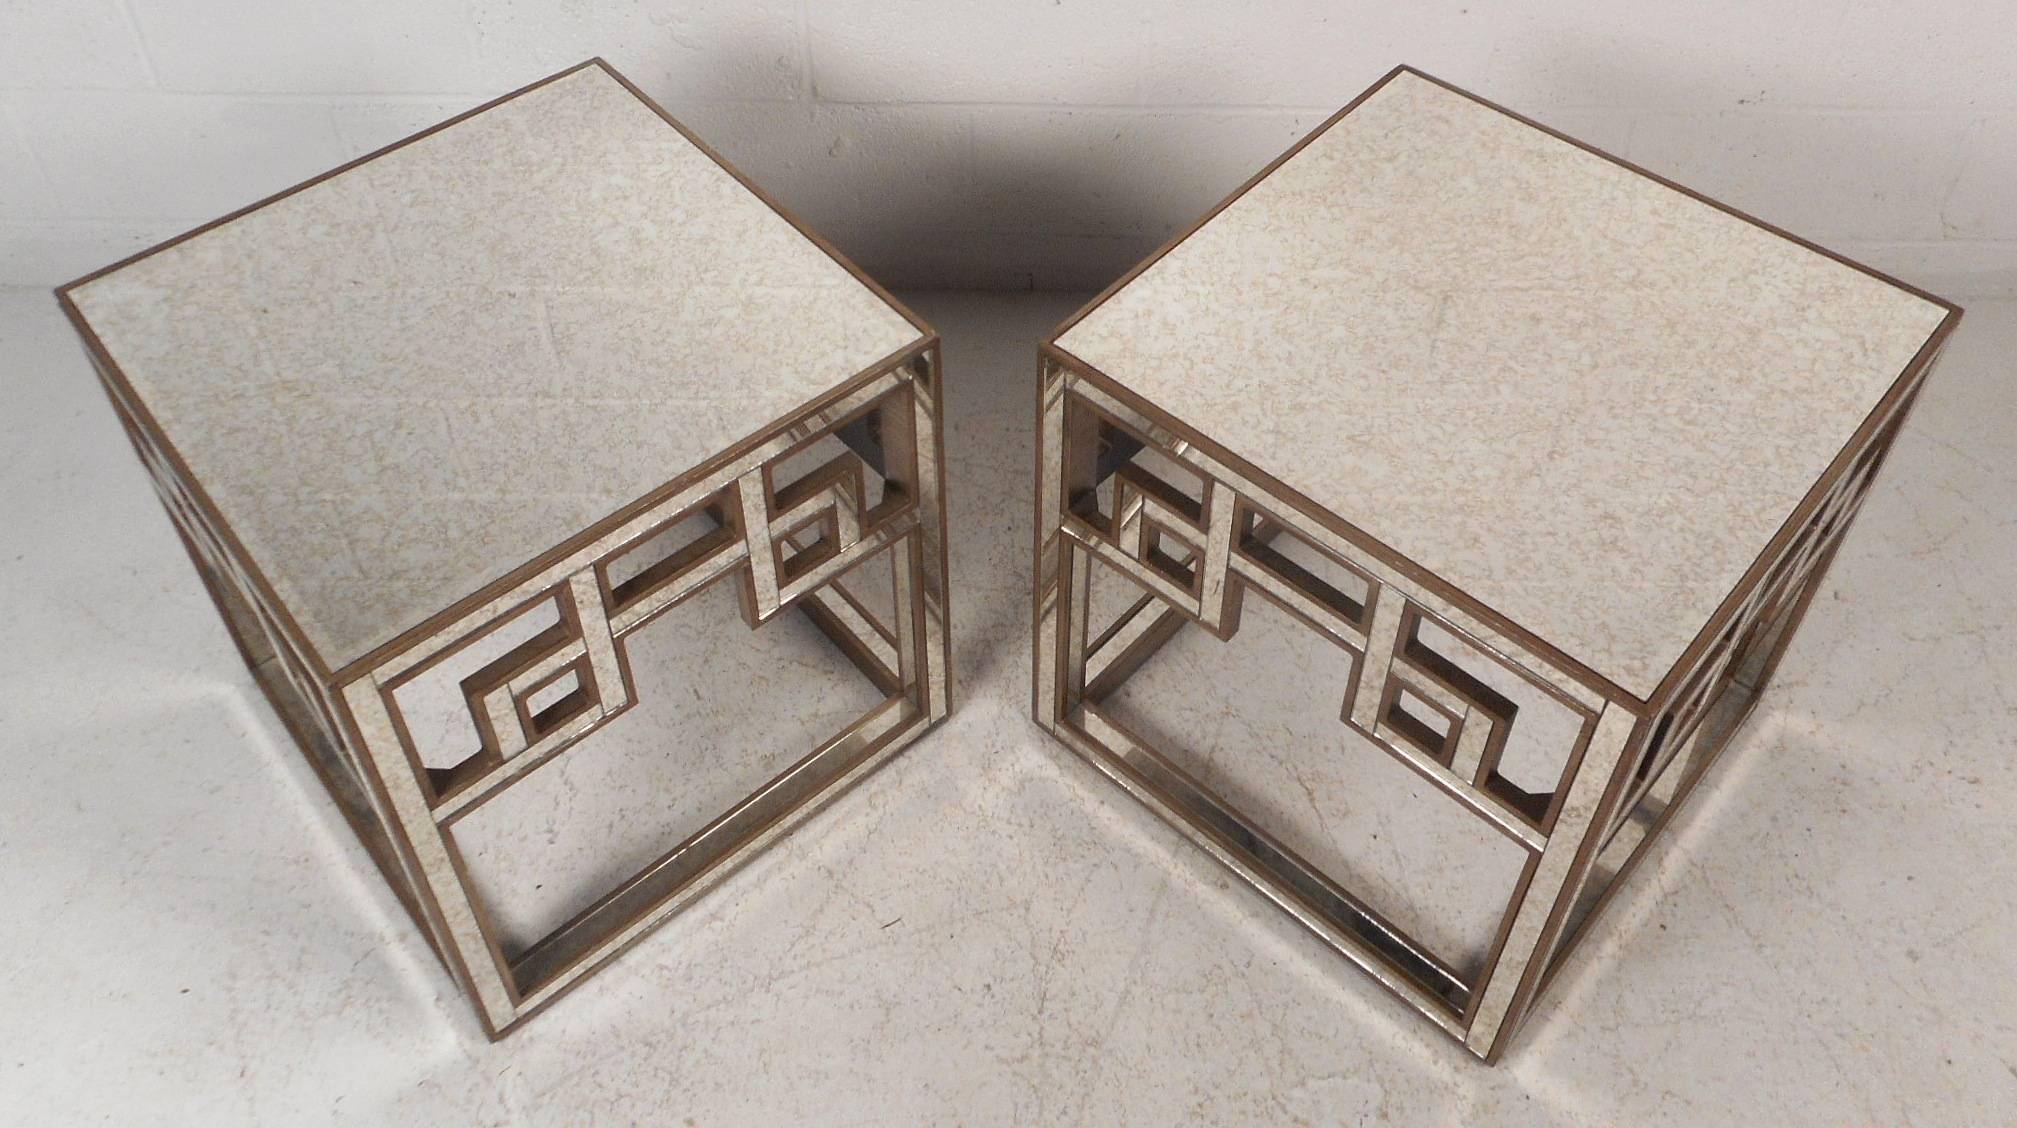 This stunning pair of vintage modern square end tables feature a mirrored top and sides with gold brushed trim. This elegant Hollywood Regency style pair have unique cut-out square and rectangular designs. Sleek antique style mirrored glass with